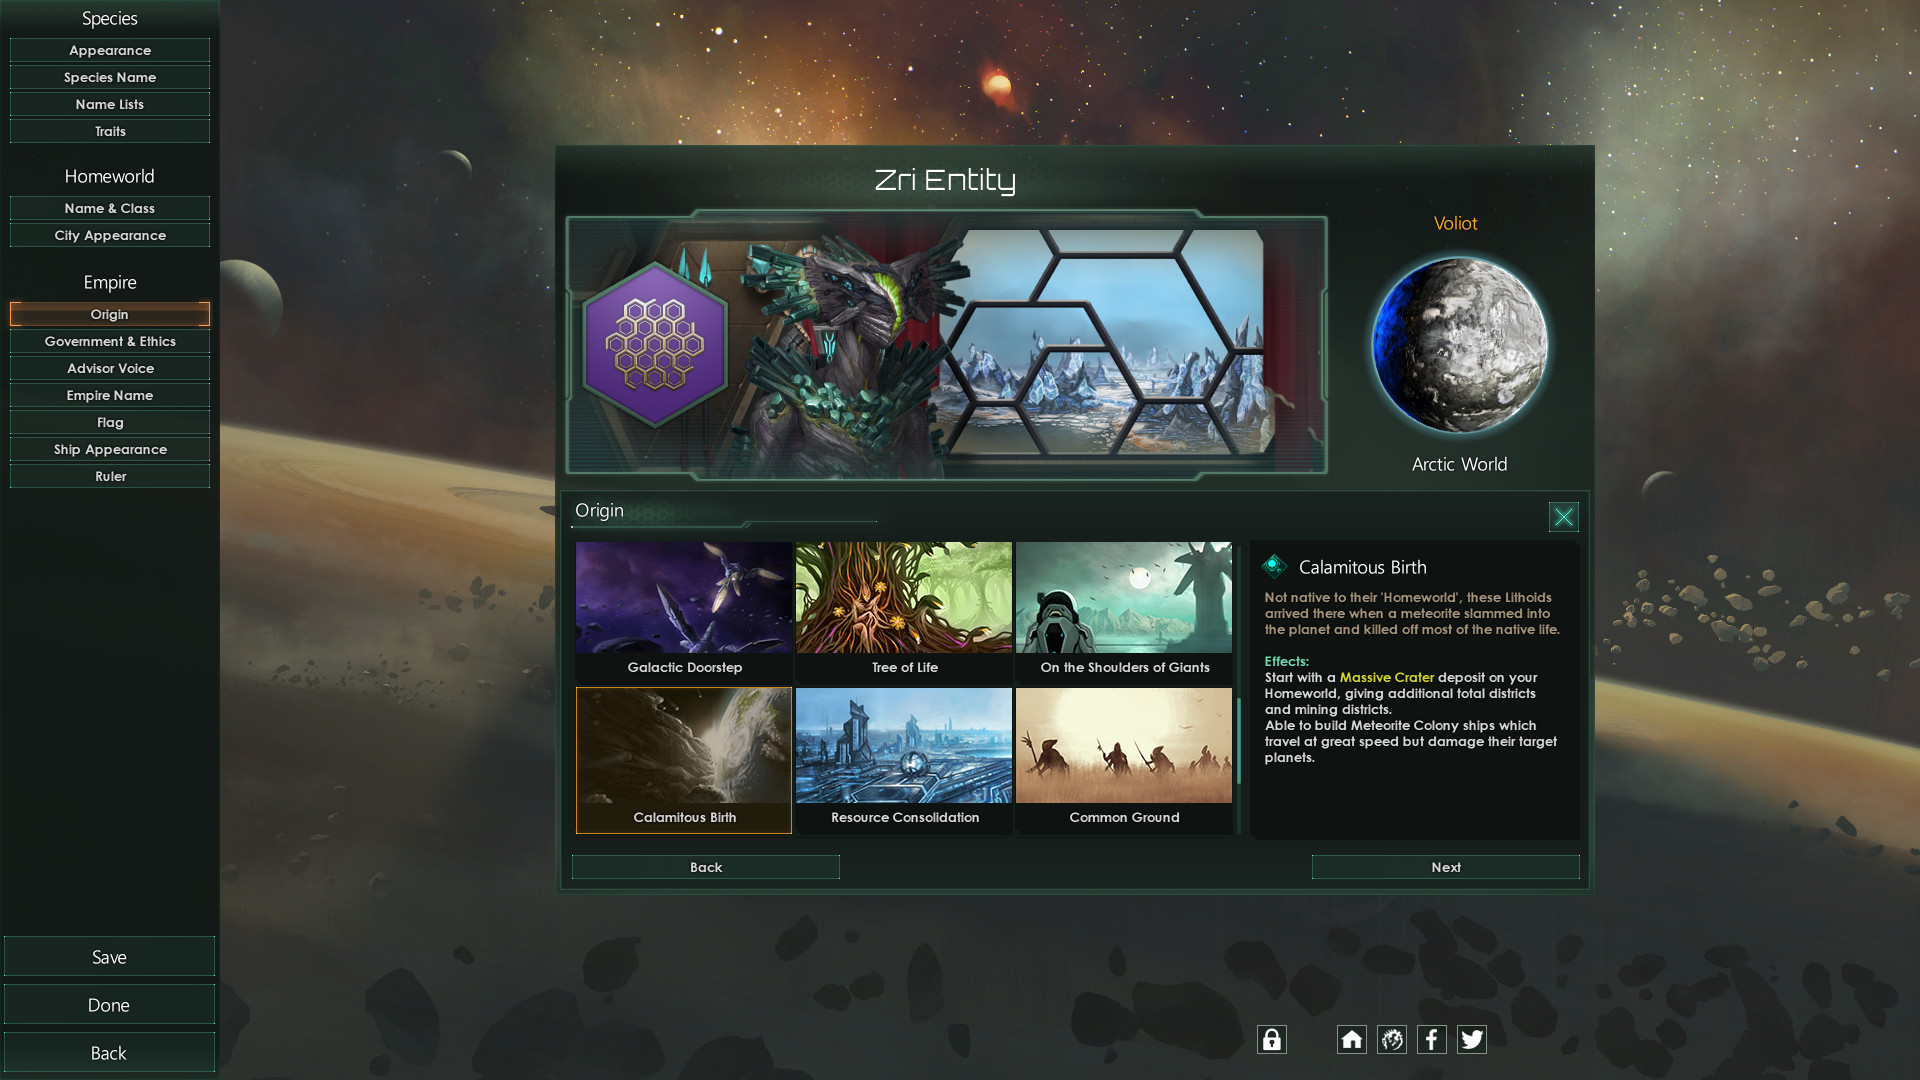 how to play stellaris correctly